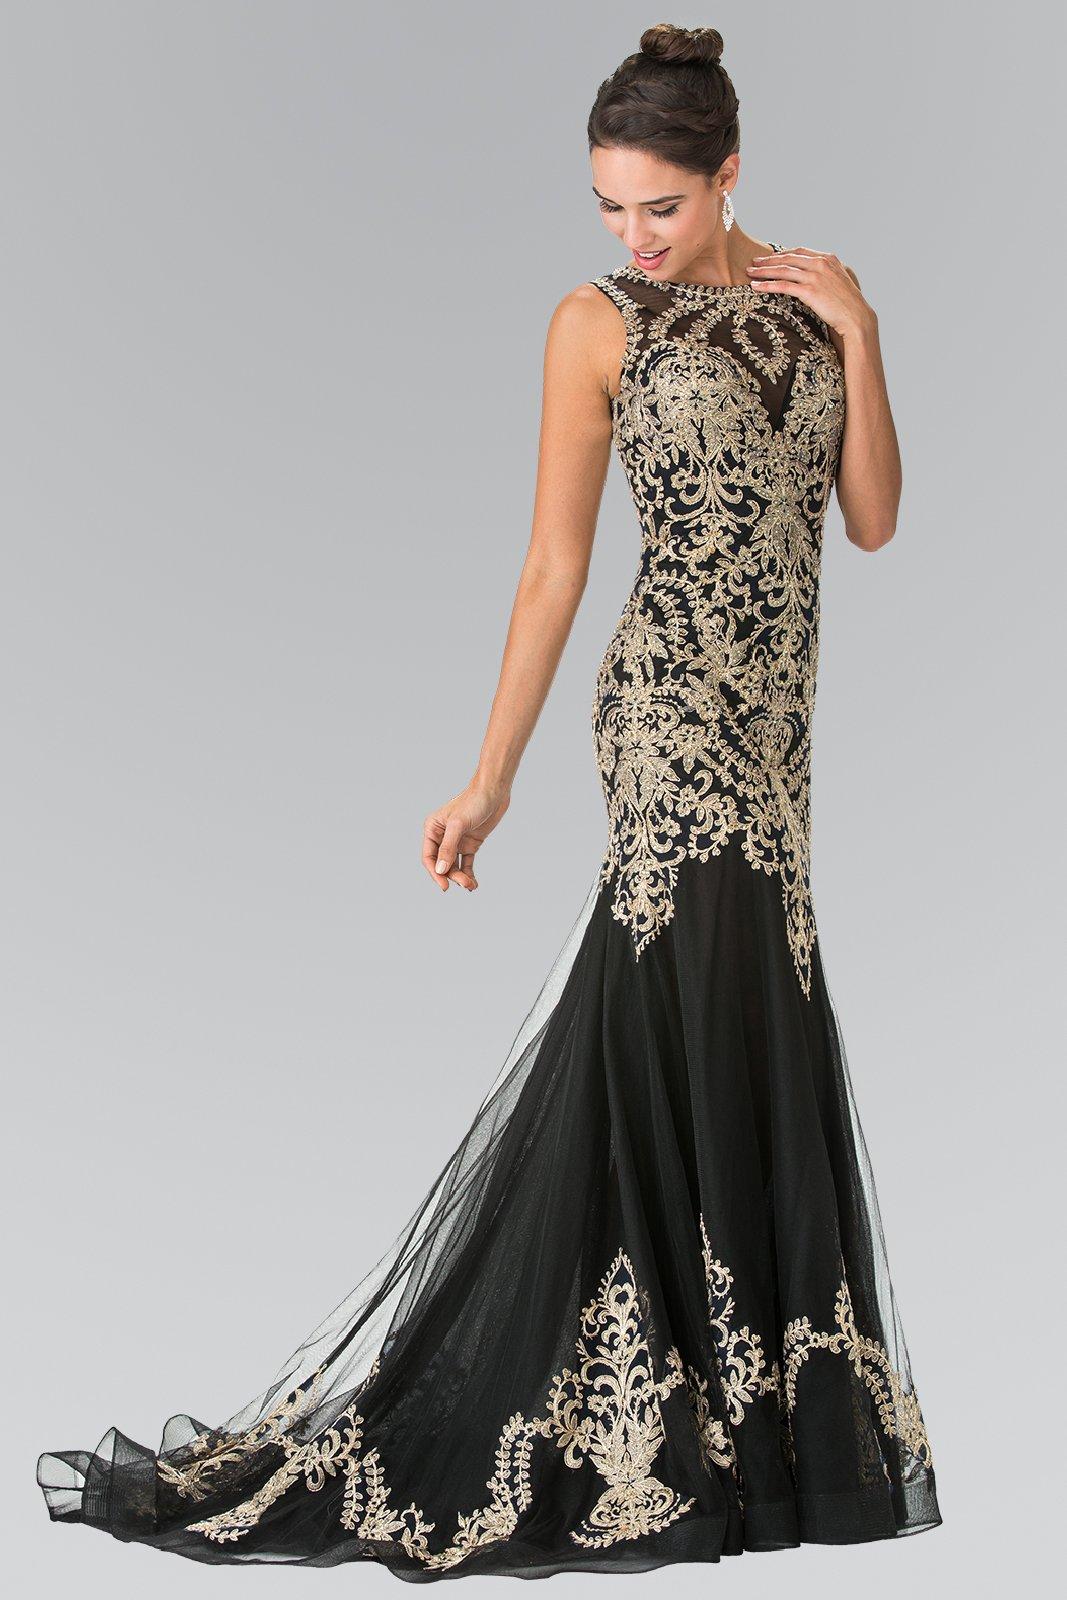 black evening dress with a touch of gold